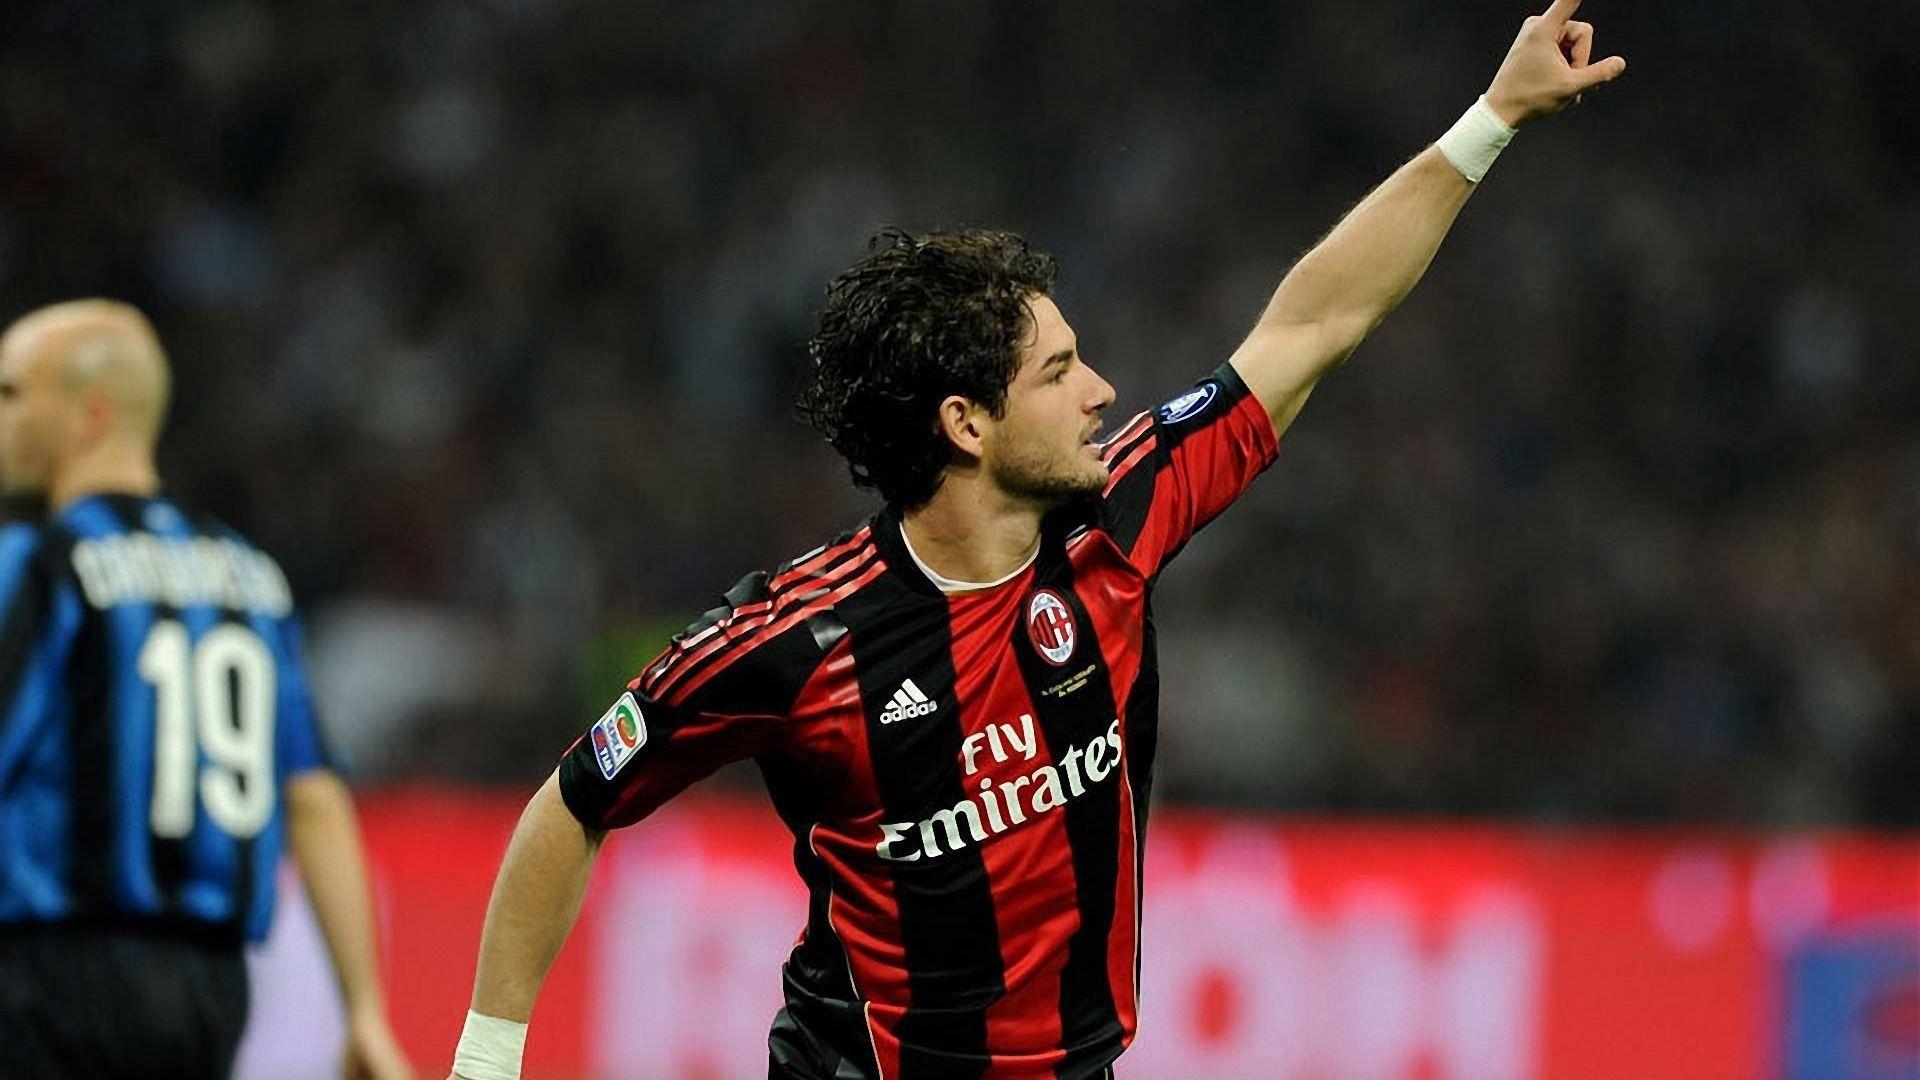 The football player of Corinthians Alexandre Pato is thanking